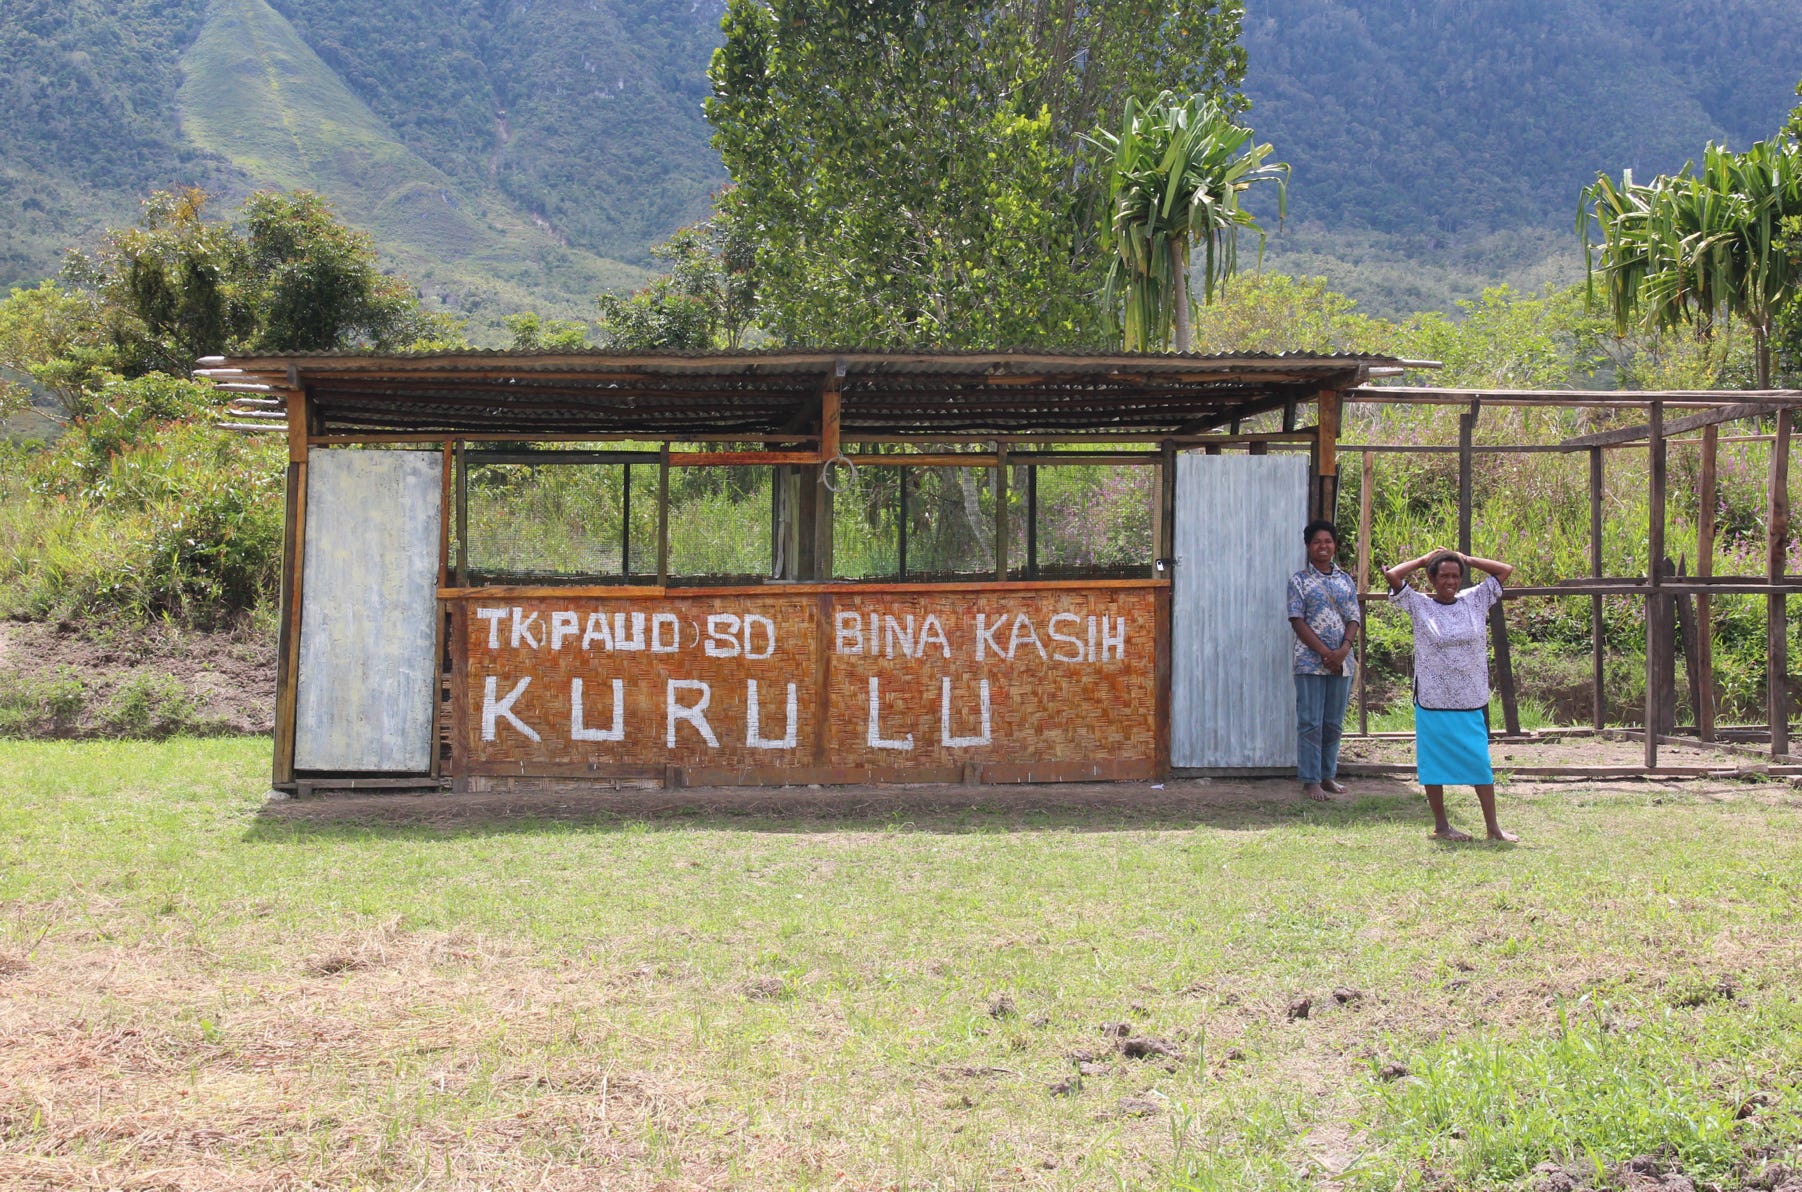 this school is administered by the congregation of the tiny Bethel Church, located beside the Wamena-Kurulu Road in Punakul village of Libarek District in the remote Highlands of West Papua (formerly Irian Jaya), Indonesia.